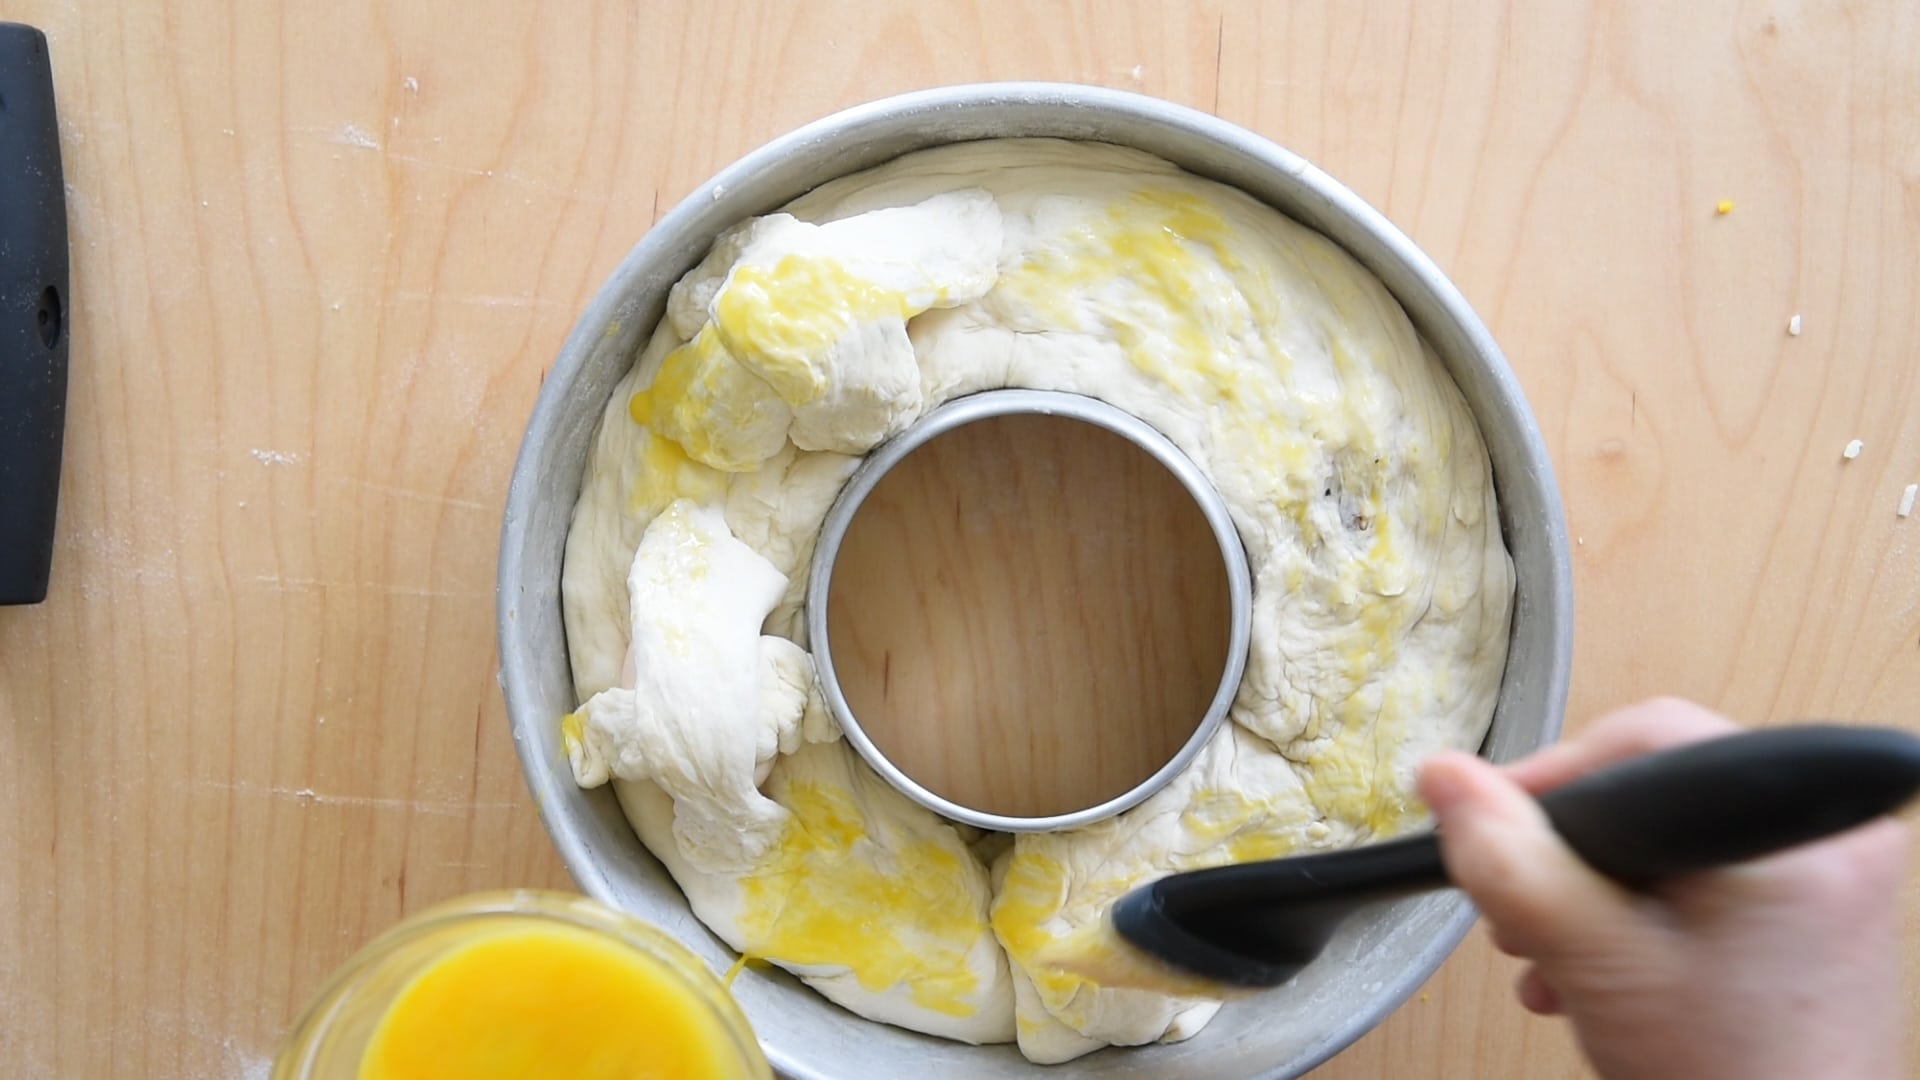 Brush the dough with egg wash